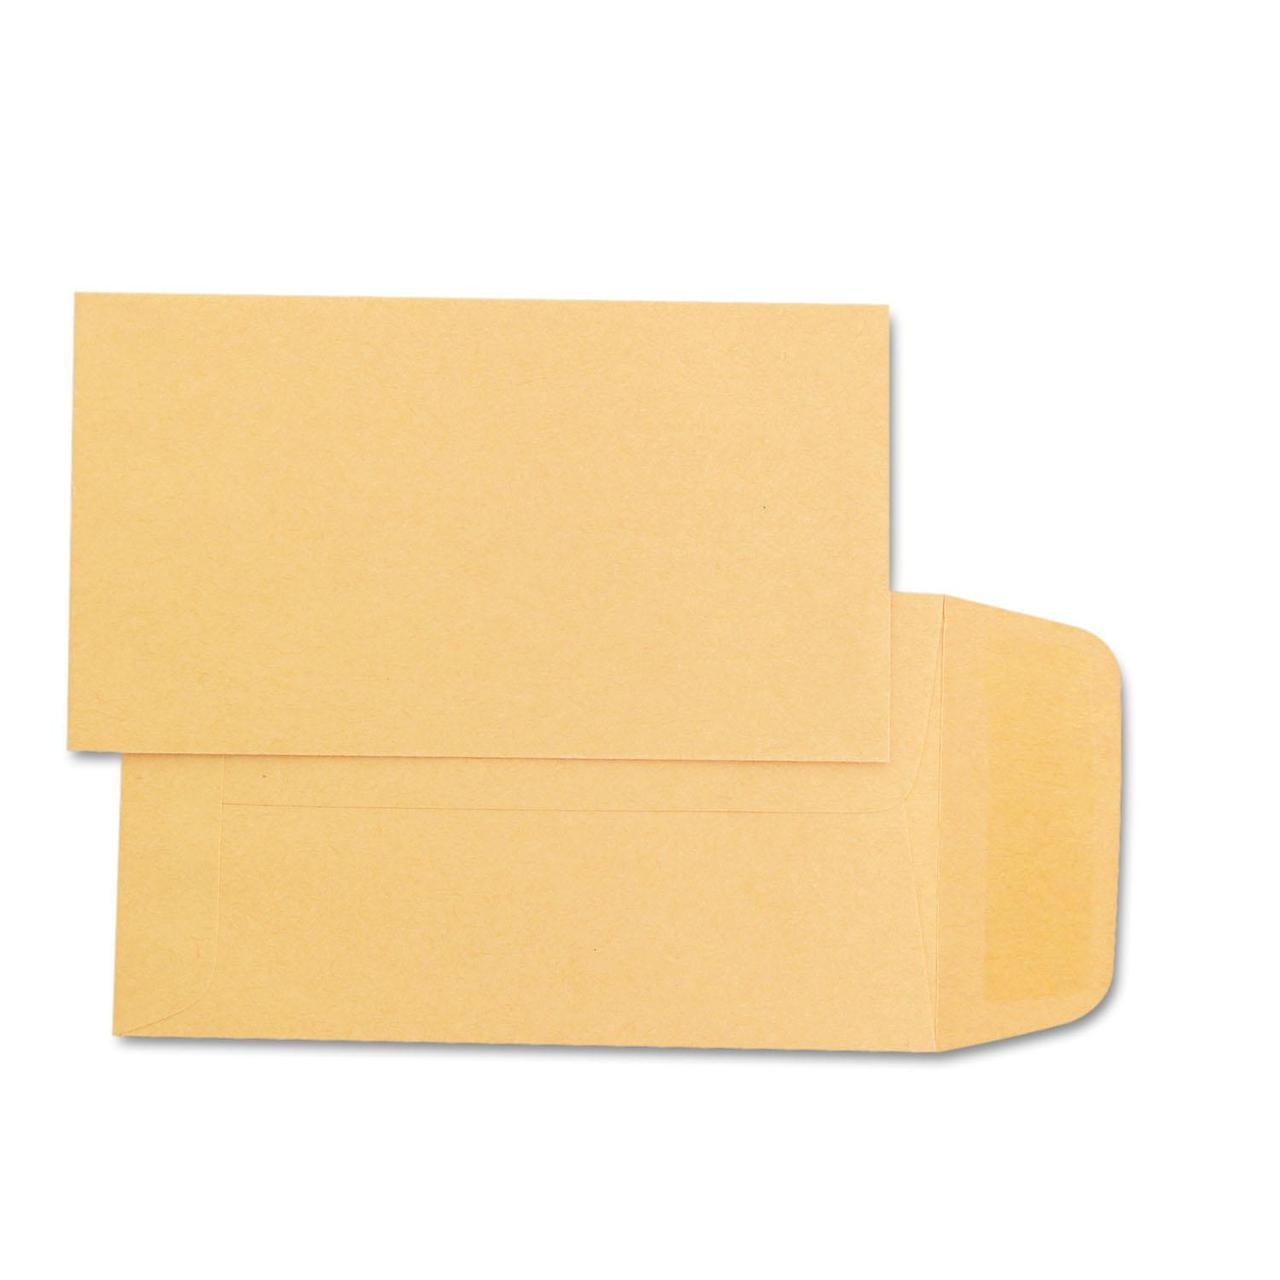 Quality Park - Kraft Coin & Small Parts Envelope, Side Seam, #1, Brown ...